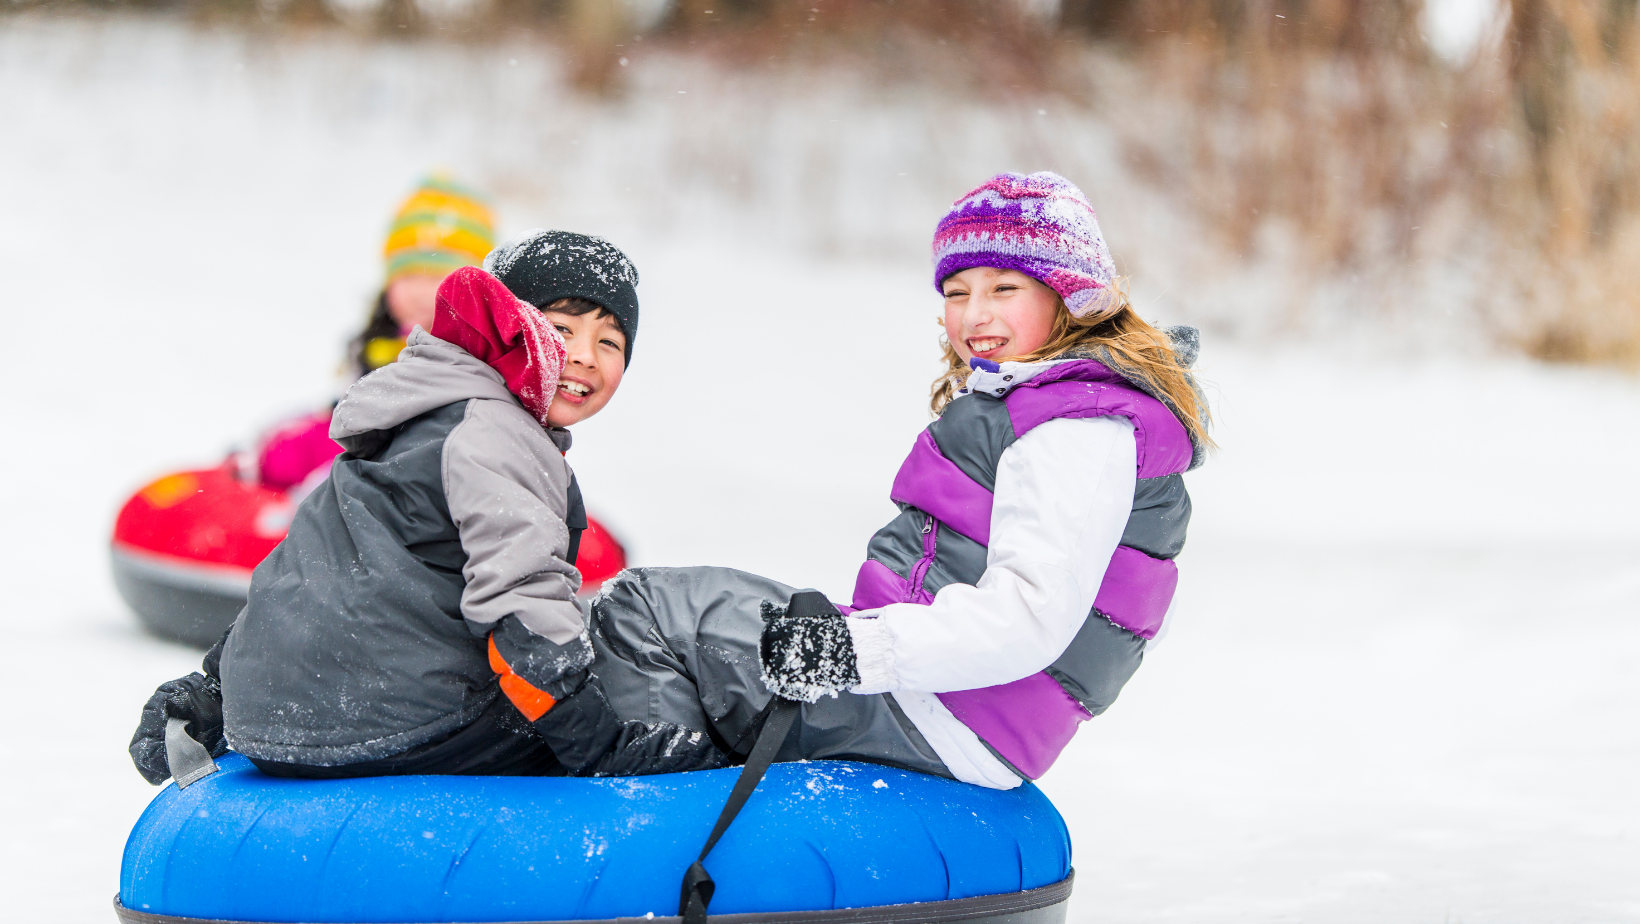 Online tickets for tubing